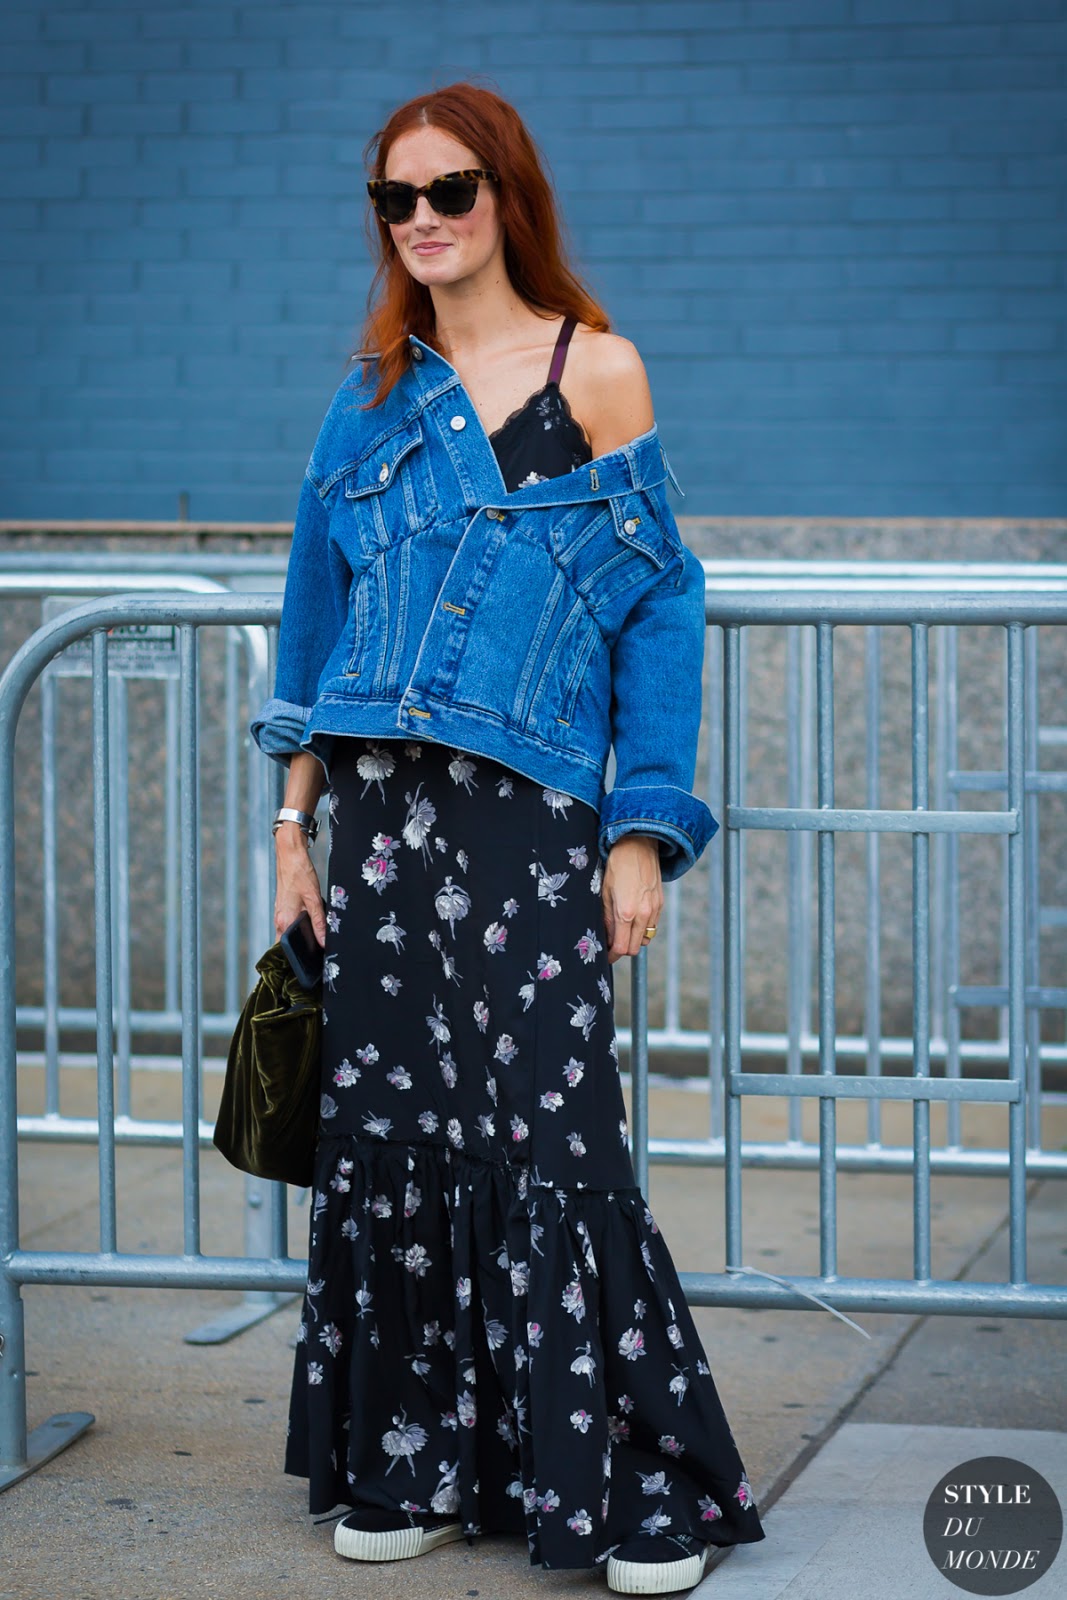 How to Wear a Floral Maxi Dress for Fall